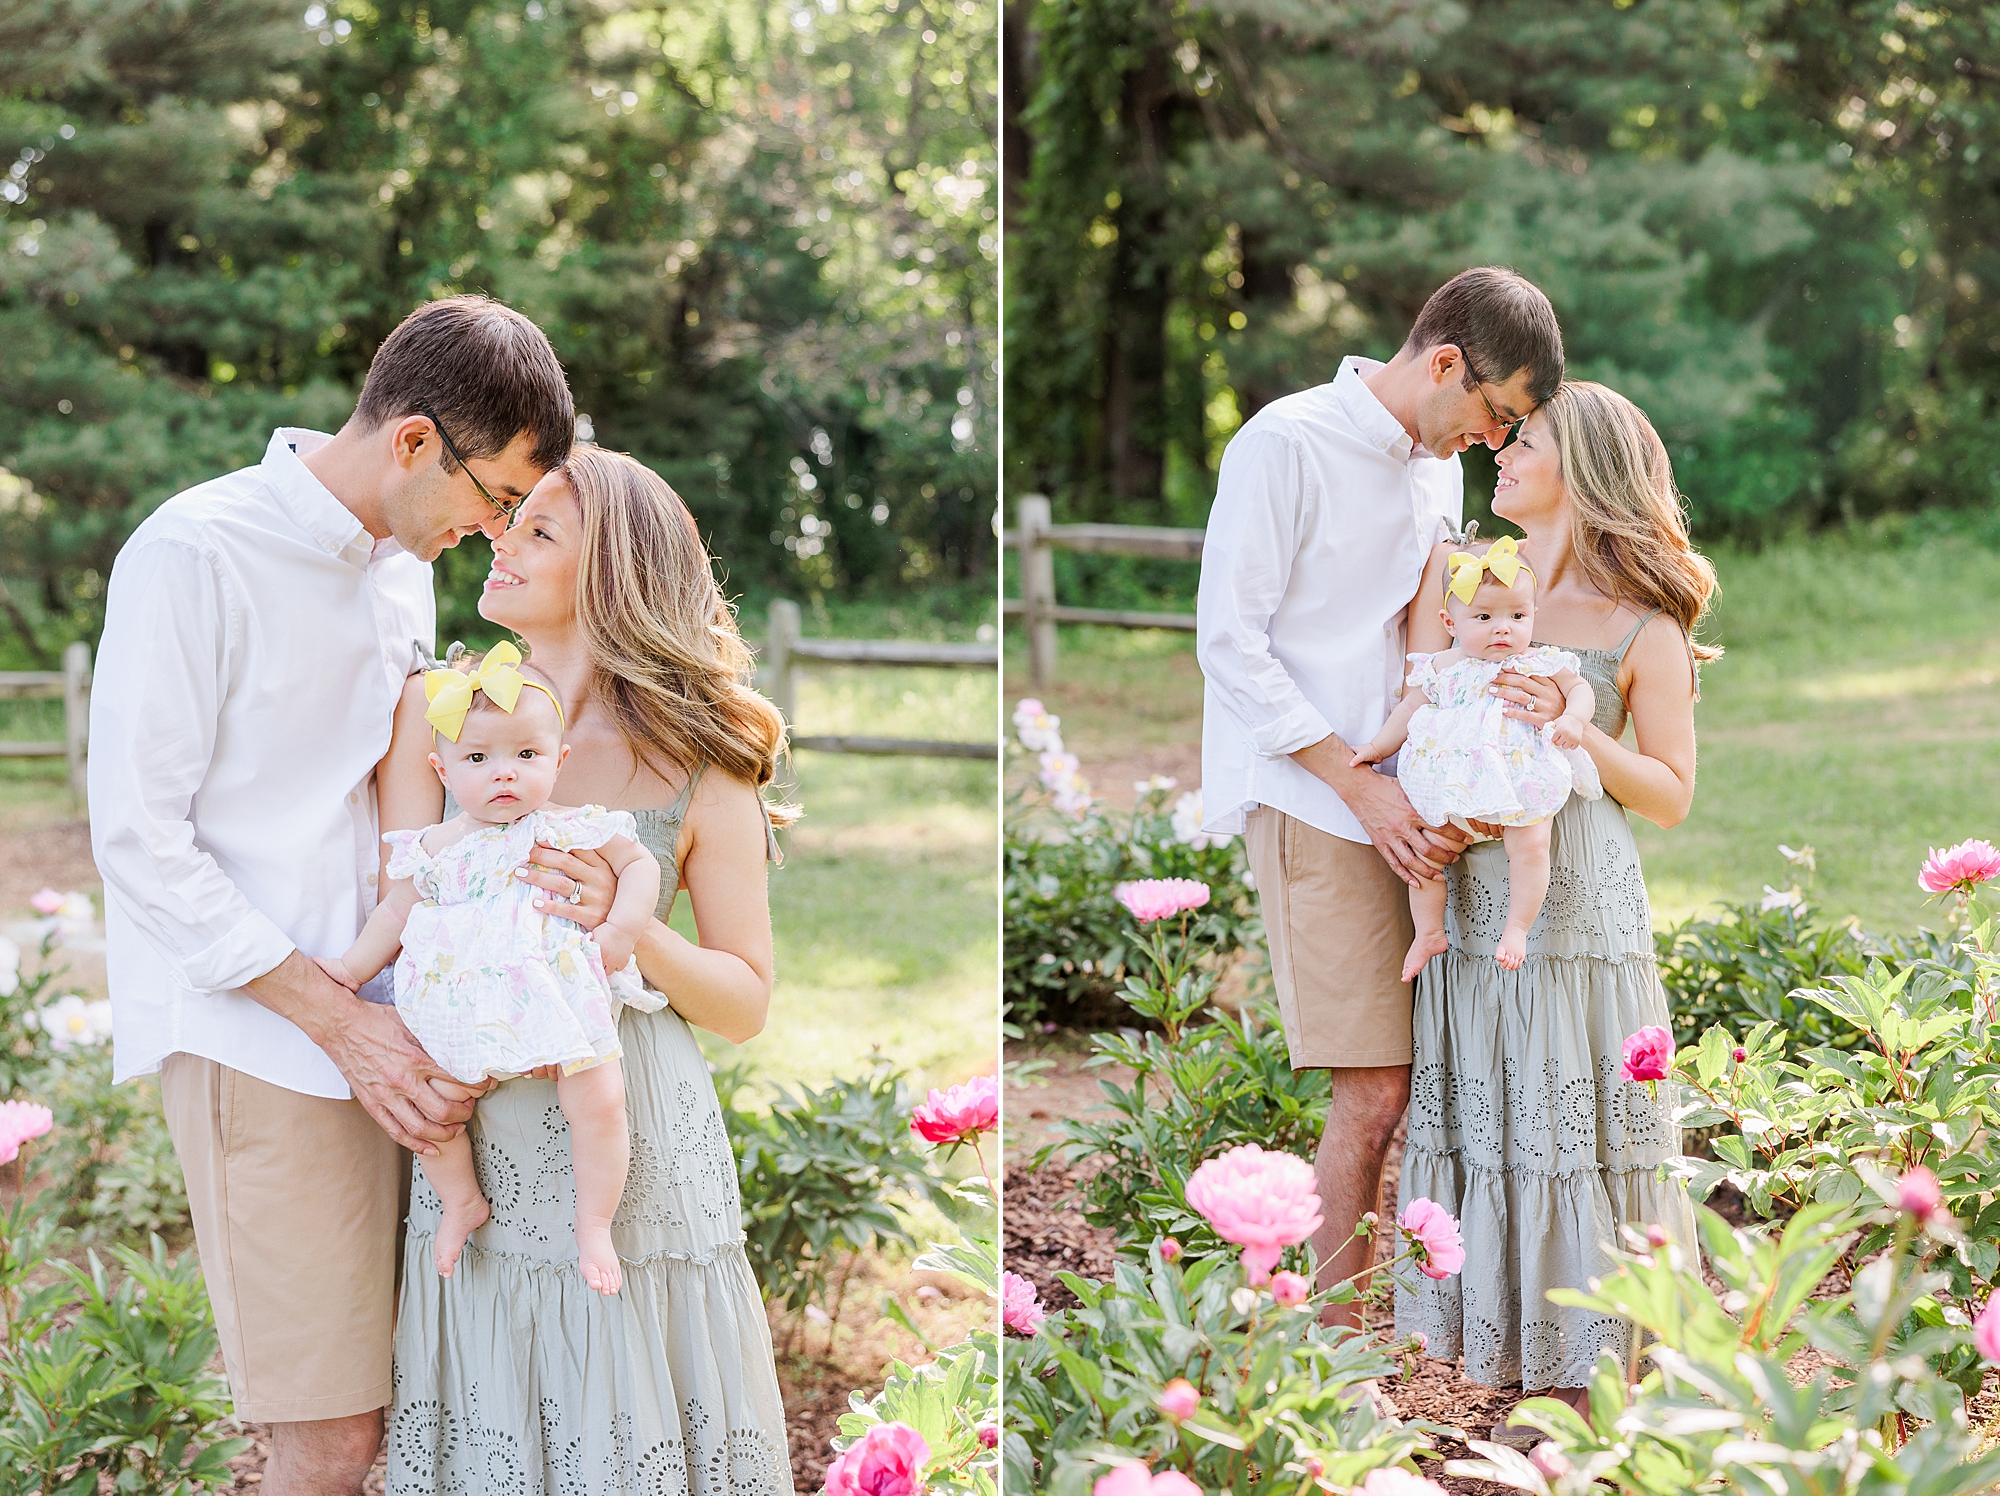 spring color palette for family photo outfits with pastel colors - light teal, purple, pink, and gold